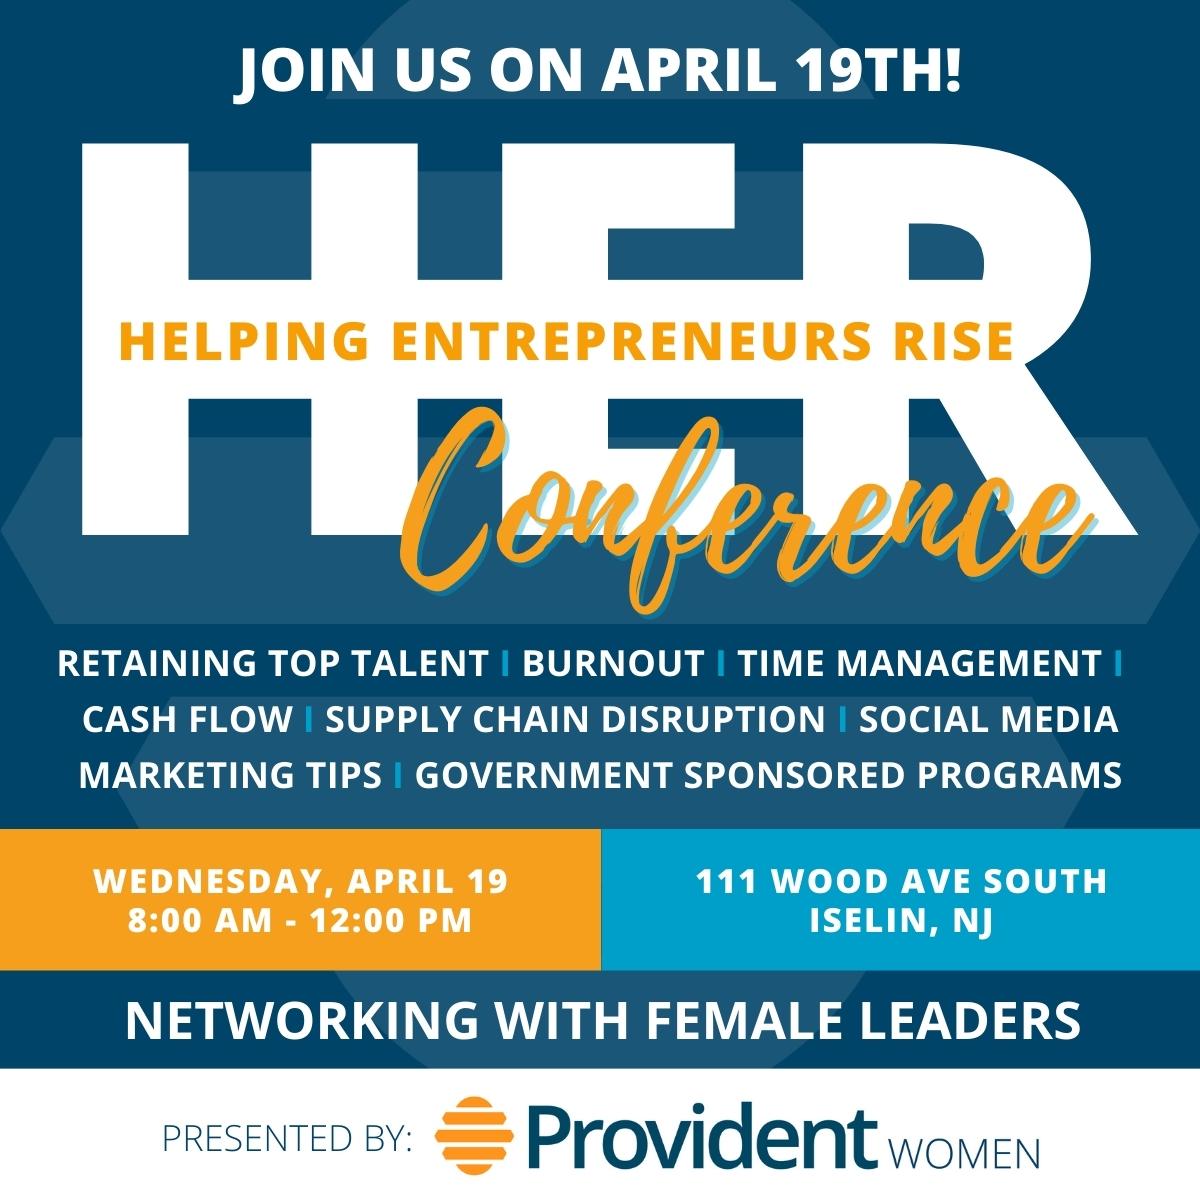 Provident Bank’s H.E.R. Conference presented by ProvidentWomen. Taking place tomorrow! A MUST-ATTEND EVENT. I'll be honored to speak as a panelist on How to Market Your Business and much more. Register below @ProvidentBank lnkd.in/e3rUQmtQ